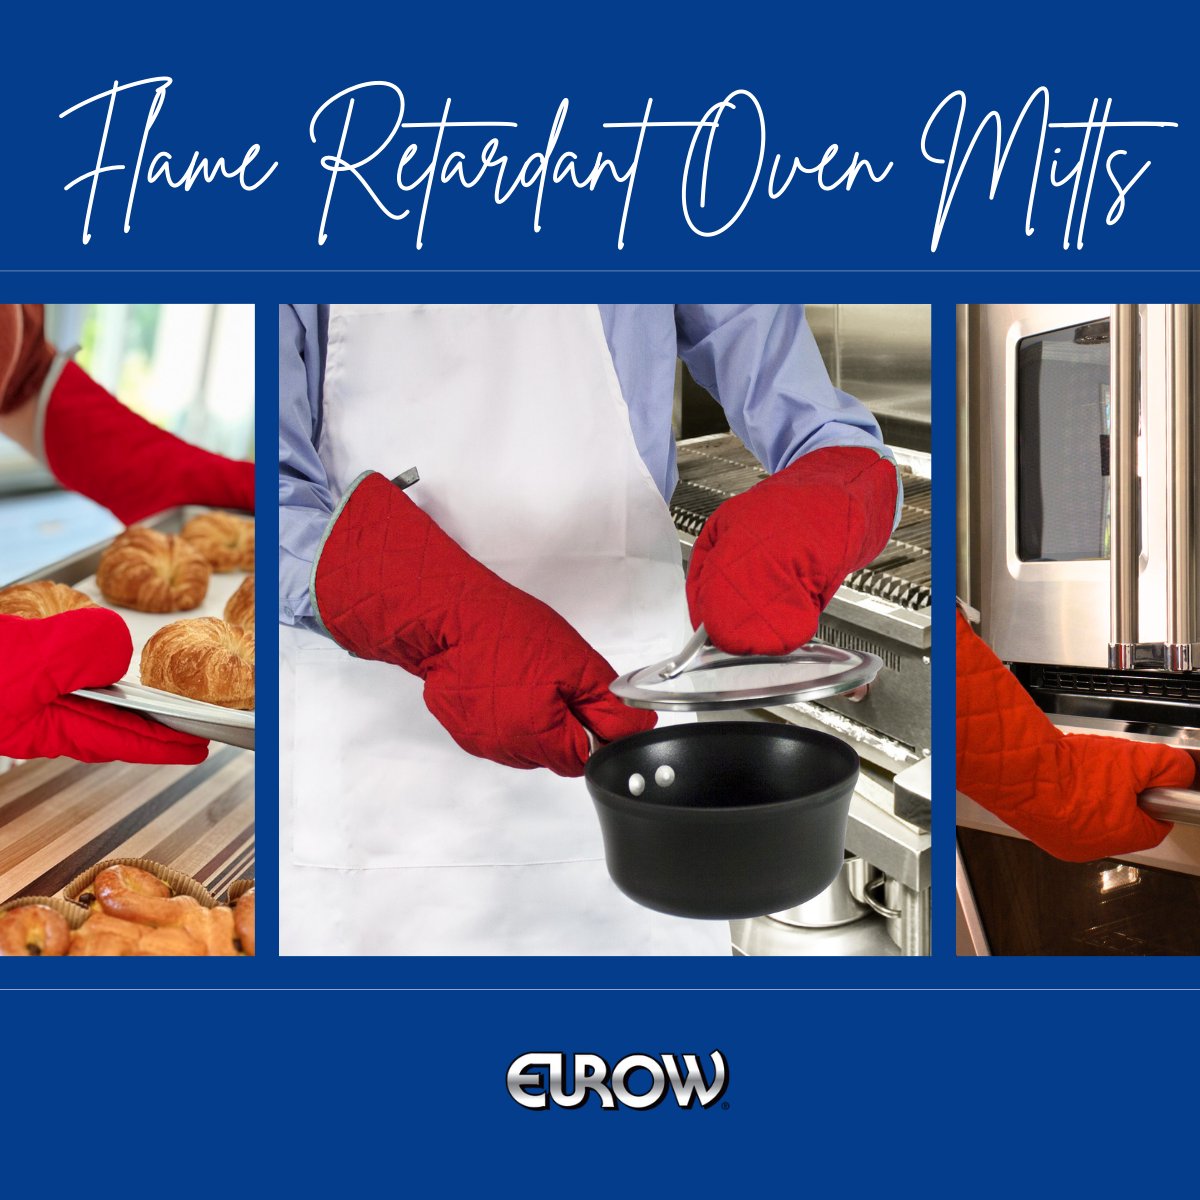 Cook, bake, and grill worry-free with our Fire Retardant #ovenmitts  🍳💪 
🛒ow.ly/XmX250QrT84

#eurow #ovenmitt #bakingproducts #kitchenaccessories #kitchenproducts #baking  #eurowcares #ovengloves #ovenglove #heatprotection #kitchenhack #trendingproduct #viralproducts